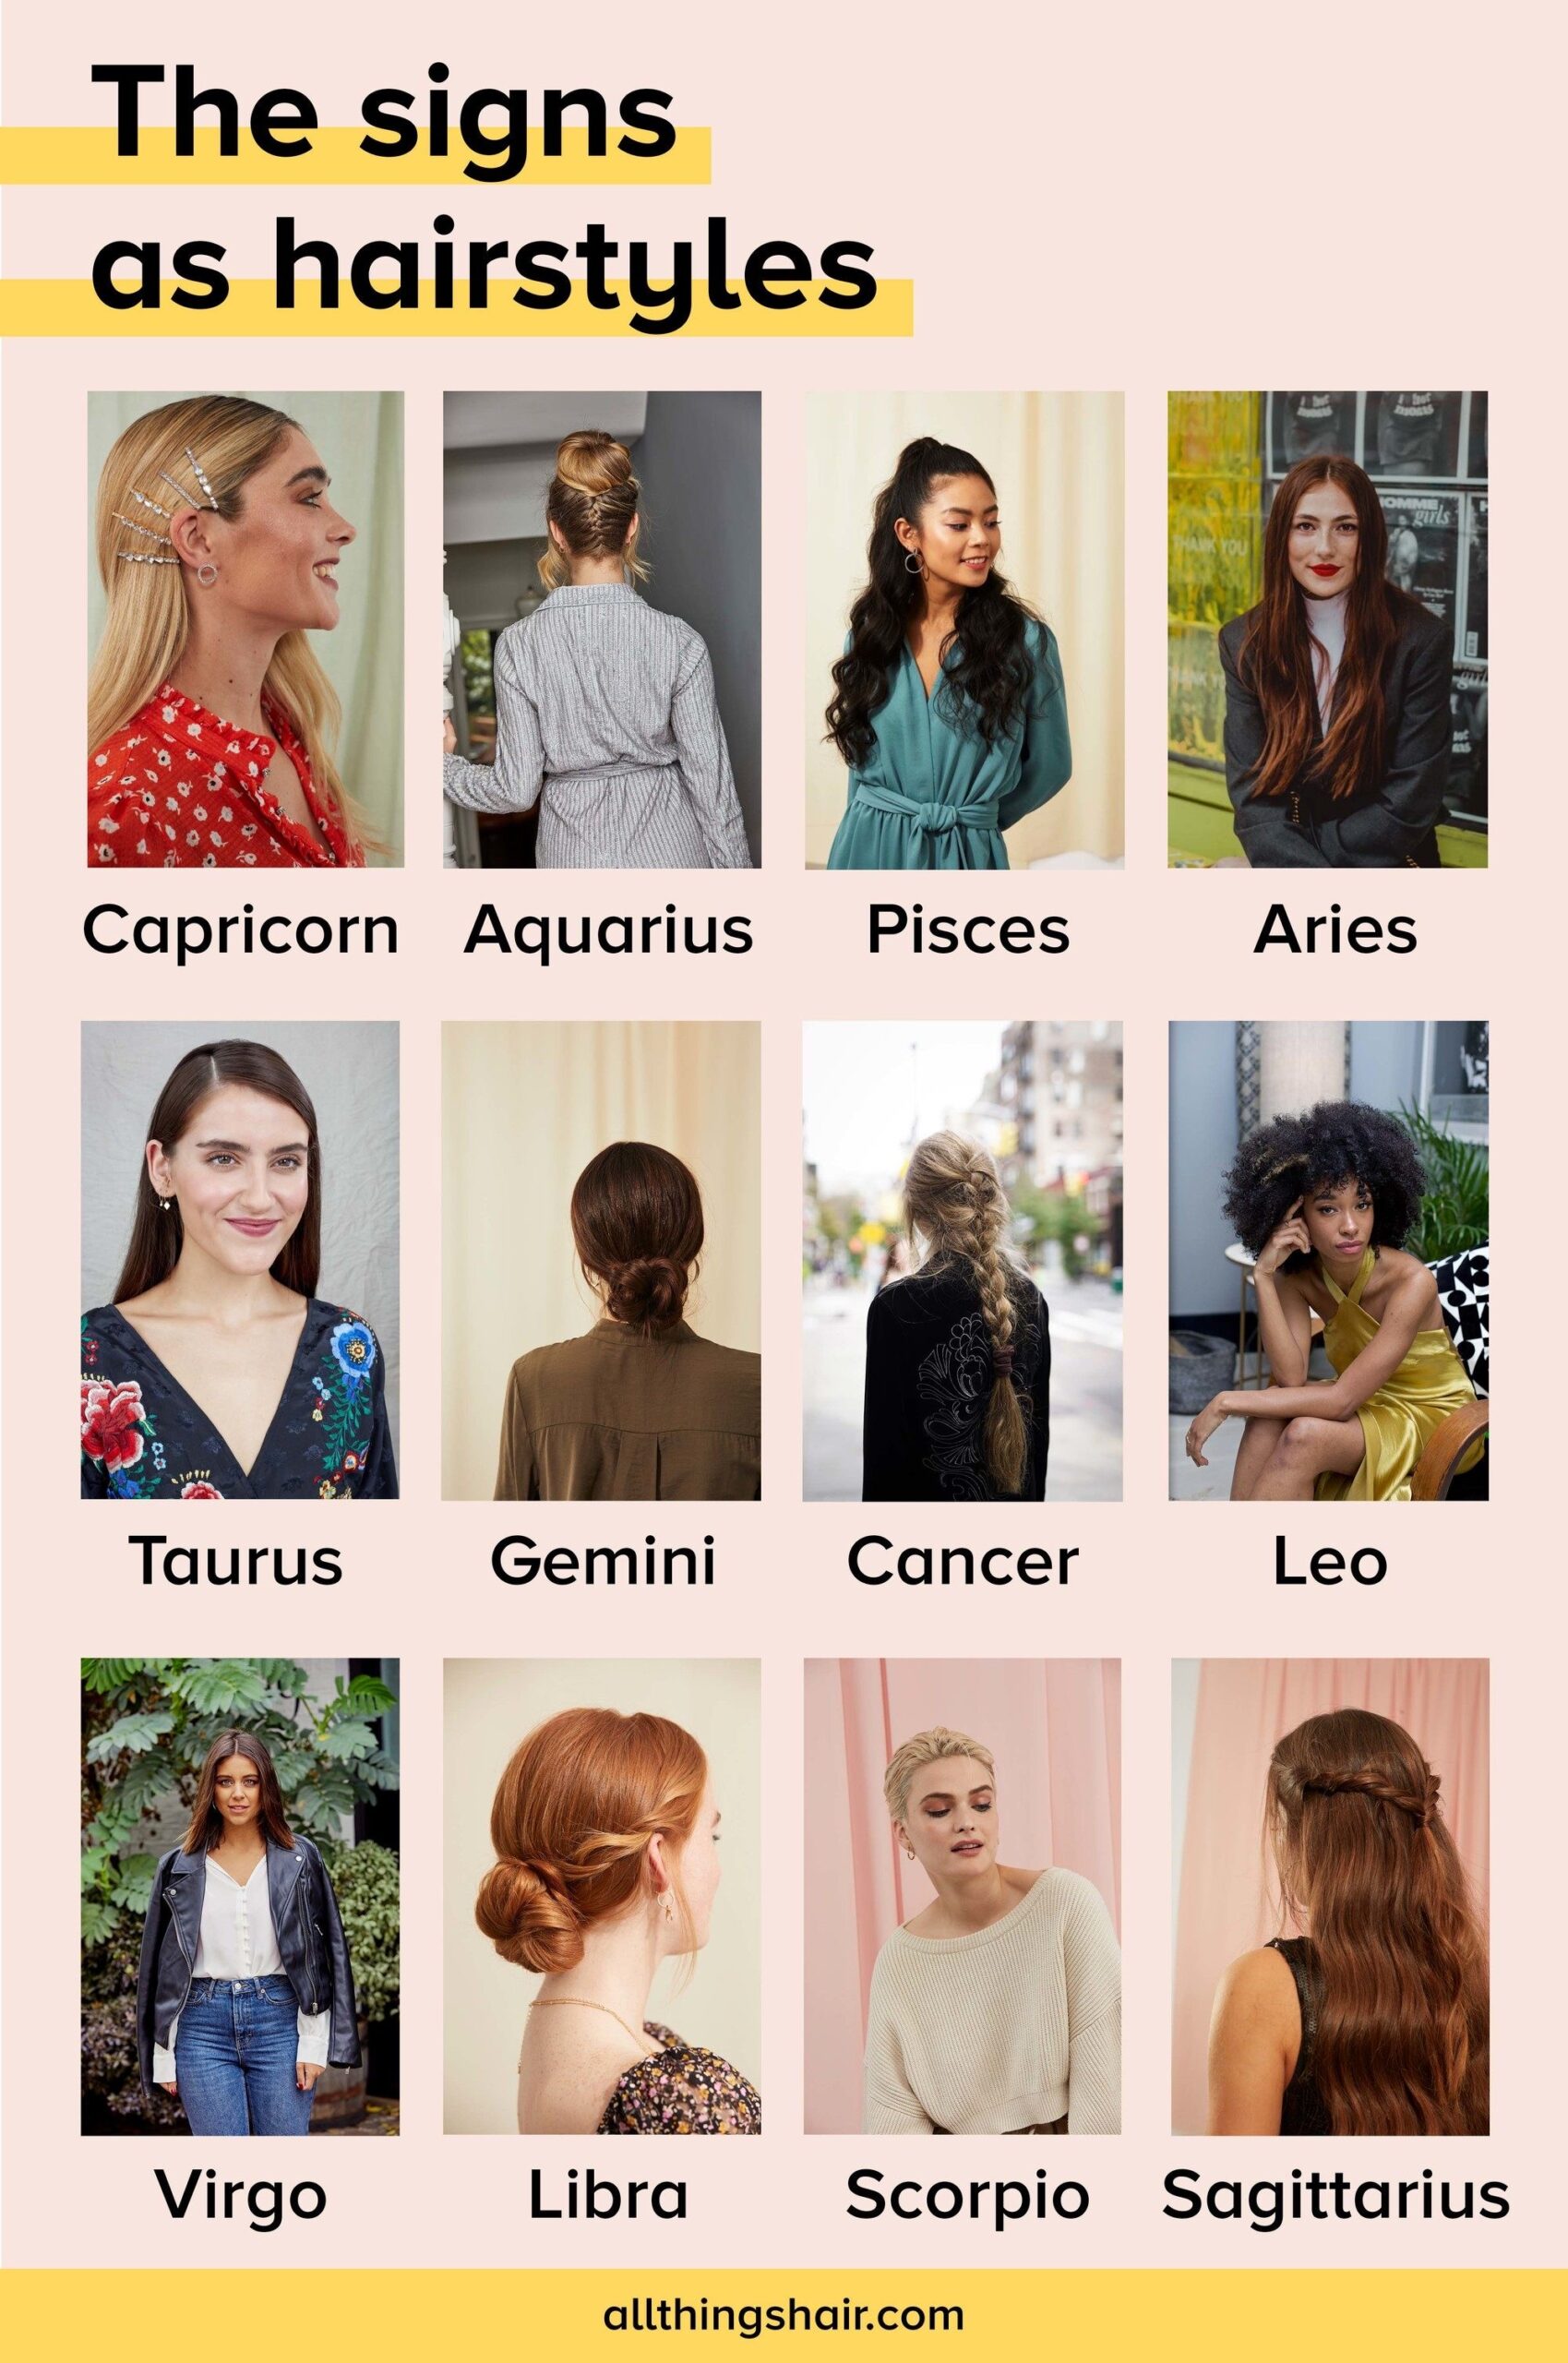 The Signs as Hairstyles